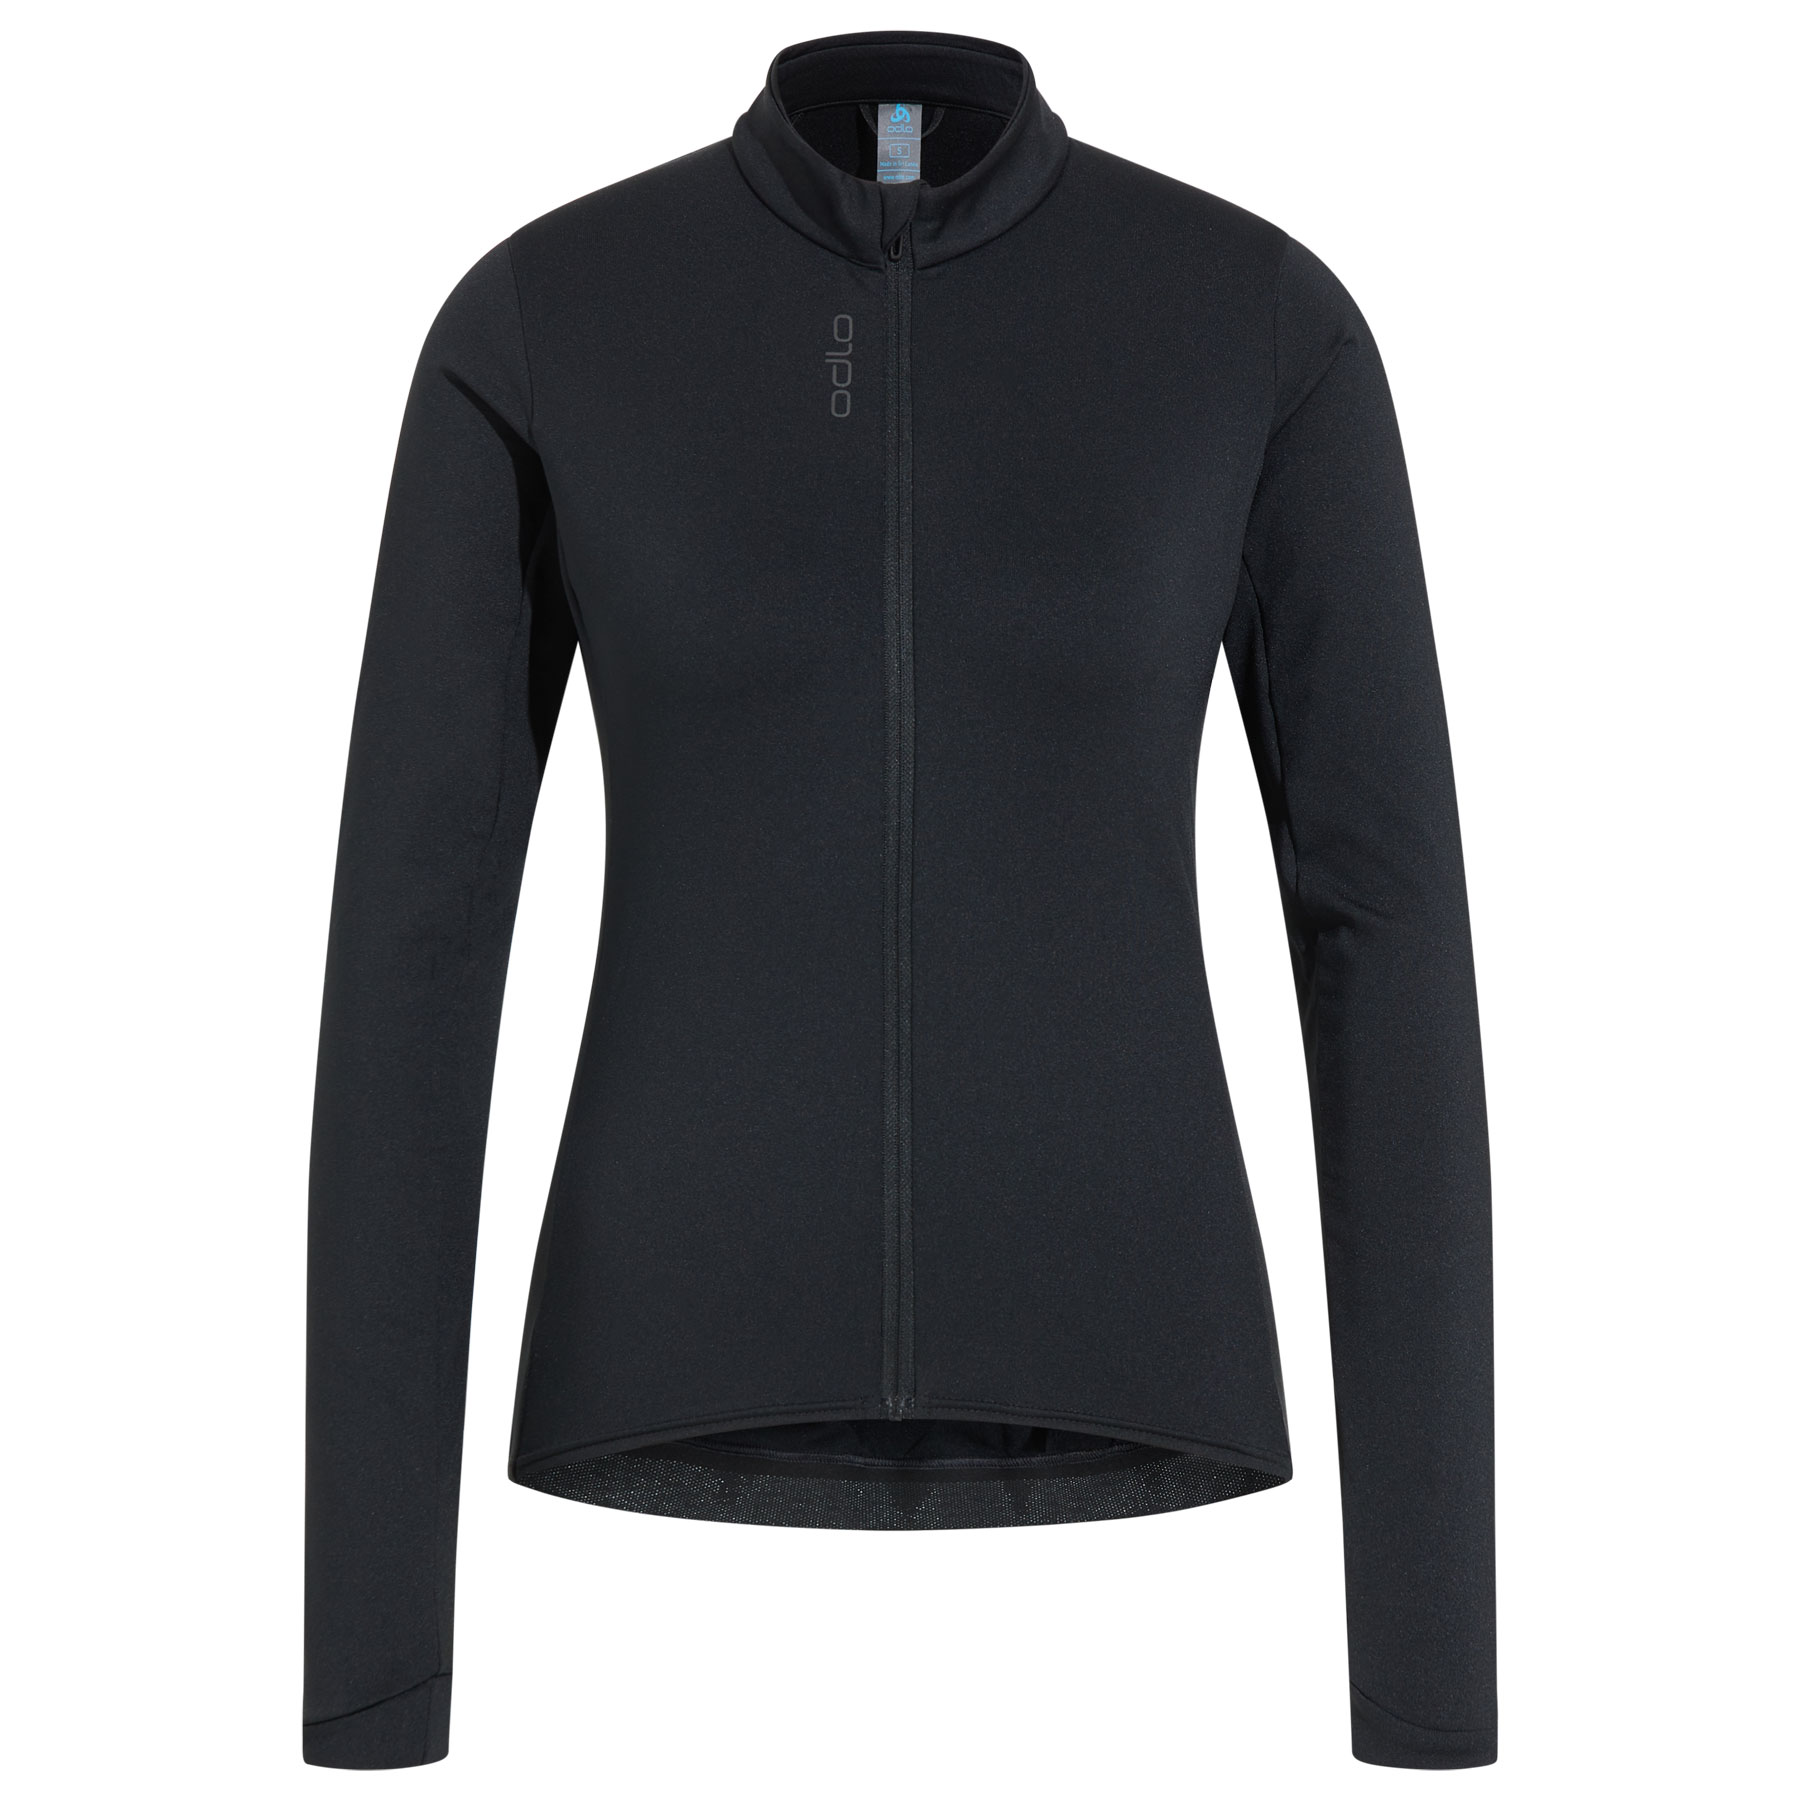 Picture of Odlo Zeroweight Ceramiwarm Mid Layer Jersey Women - black